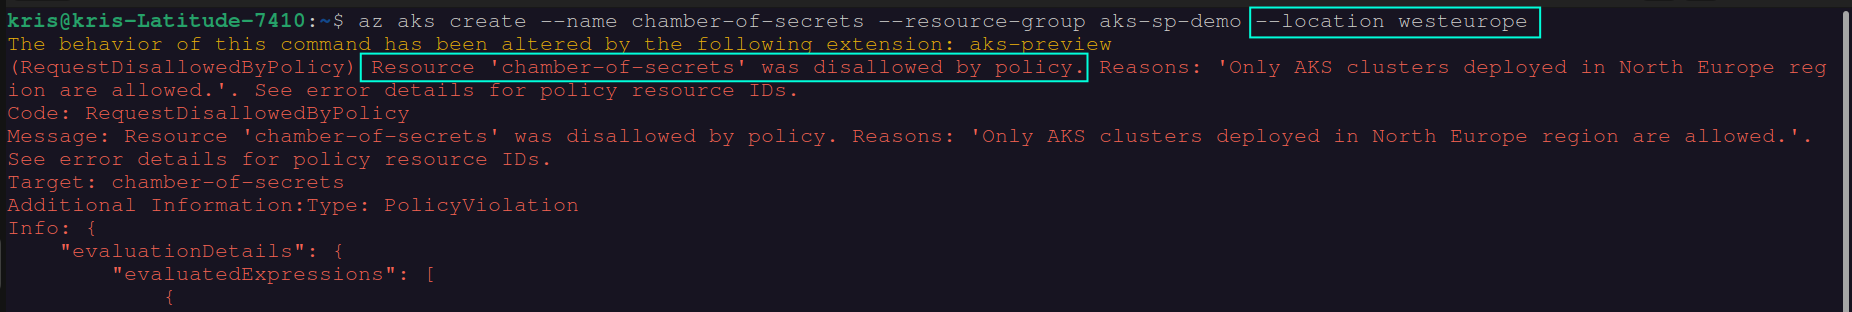 Screenshot of the non-compliant Deployment being denied by enforced custom Azure Policy definition for disallowing deployment of AKS clusters in all regions except for North Europe